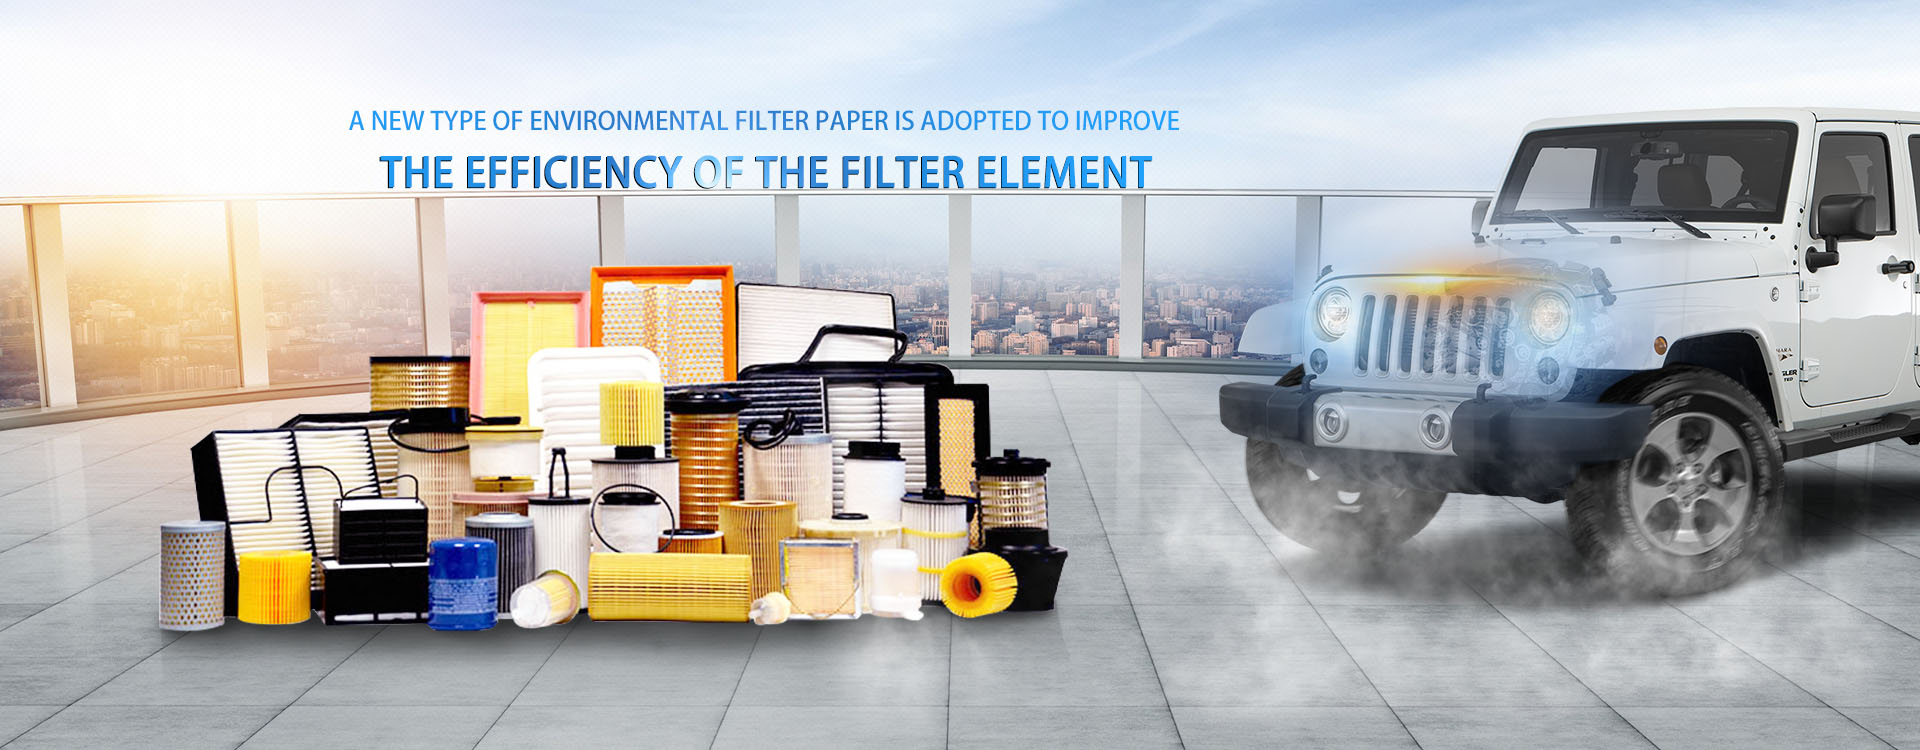 A new type of environmental filter paper is adopted to improve the efficiency of the filter element.